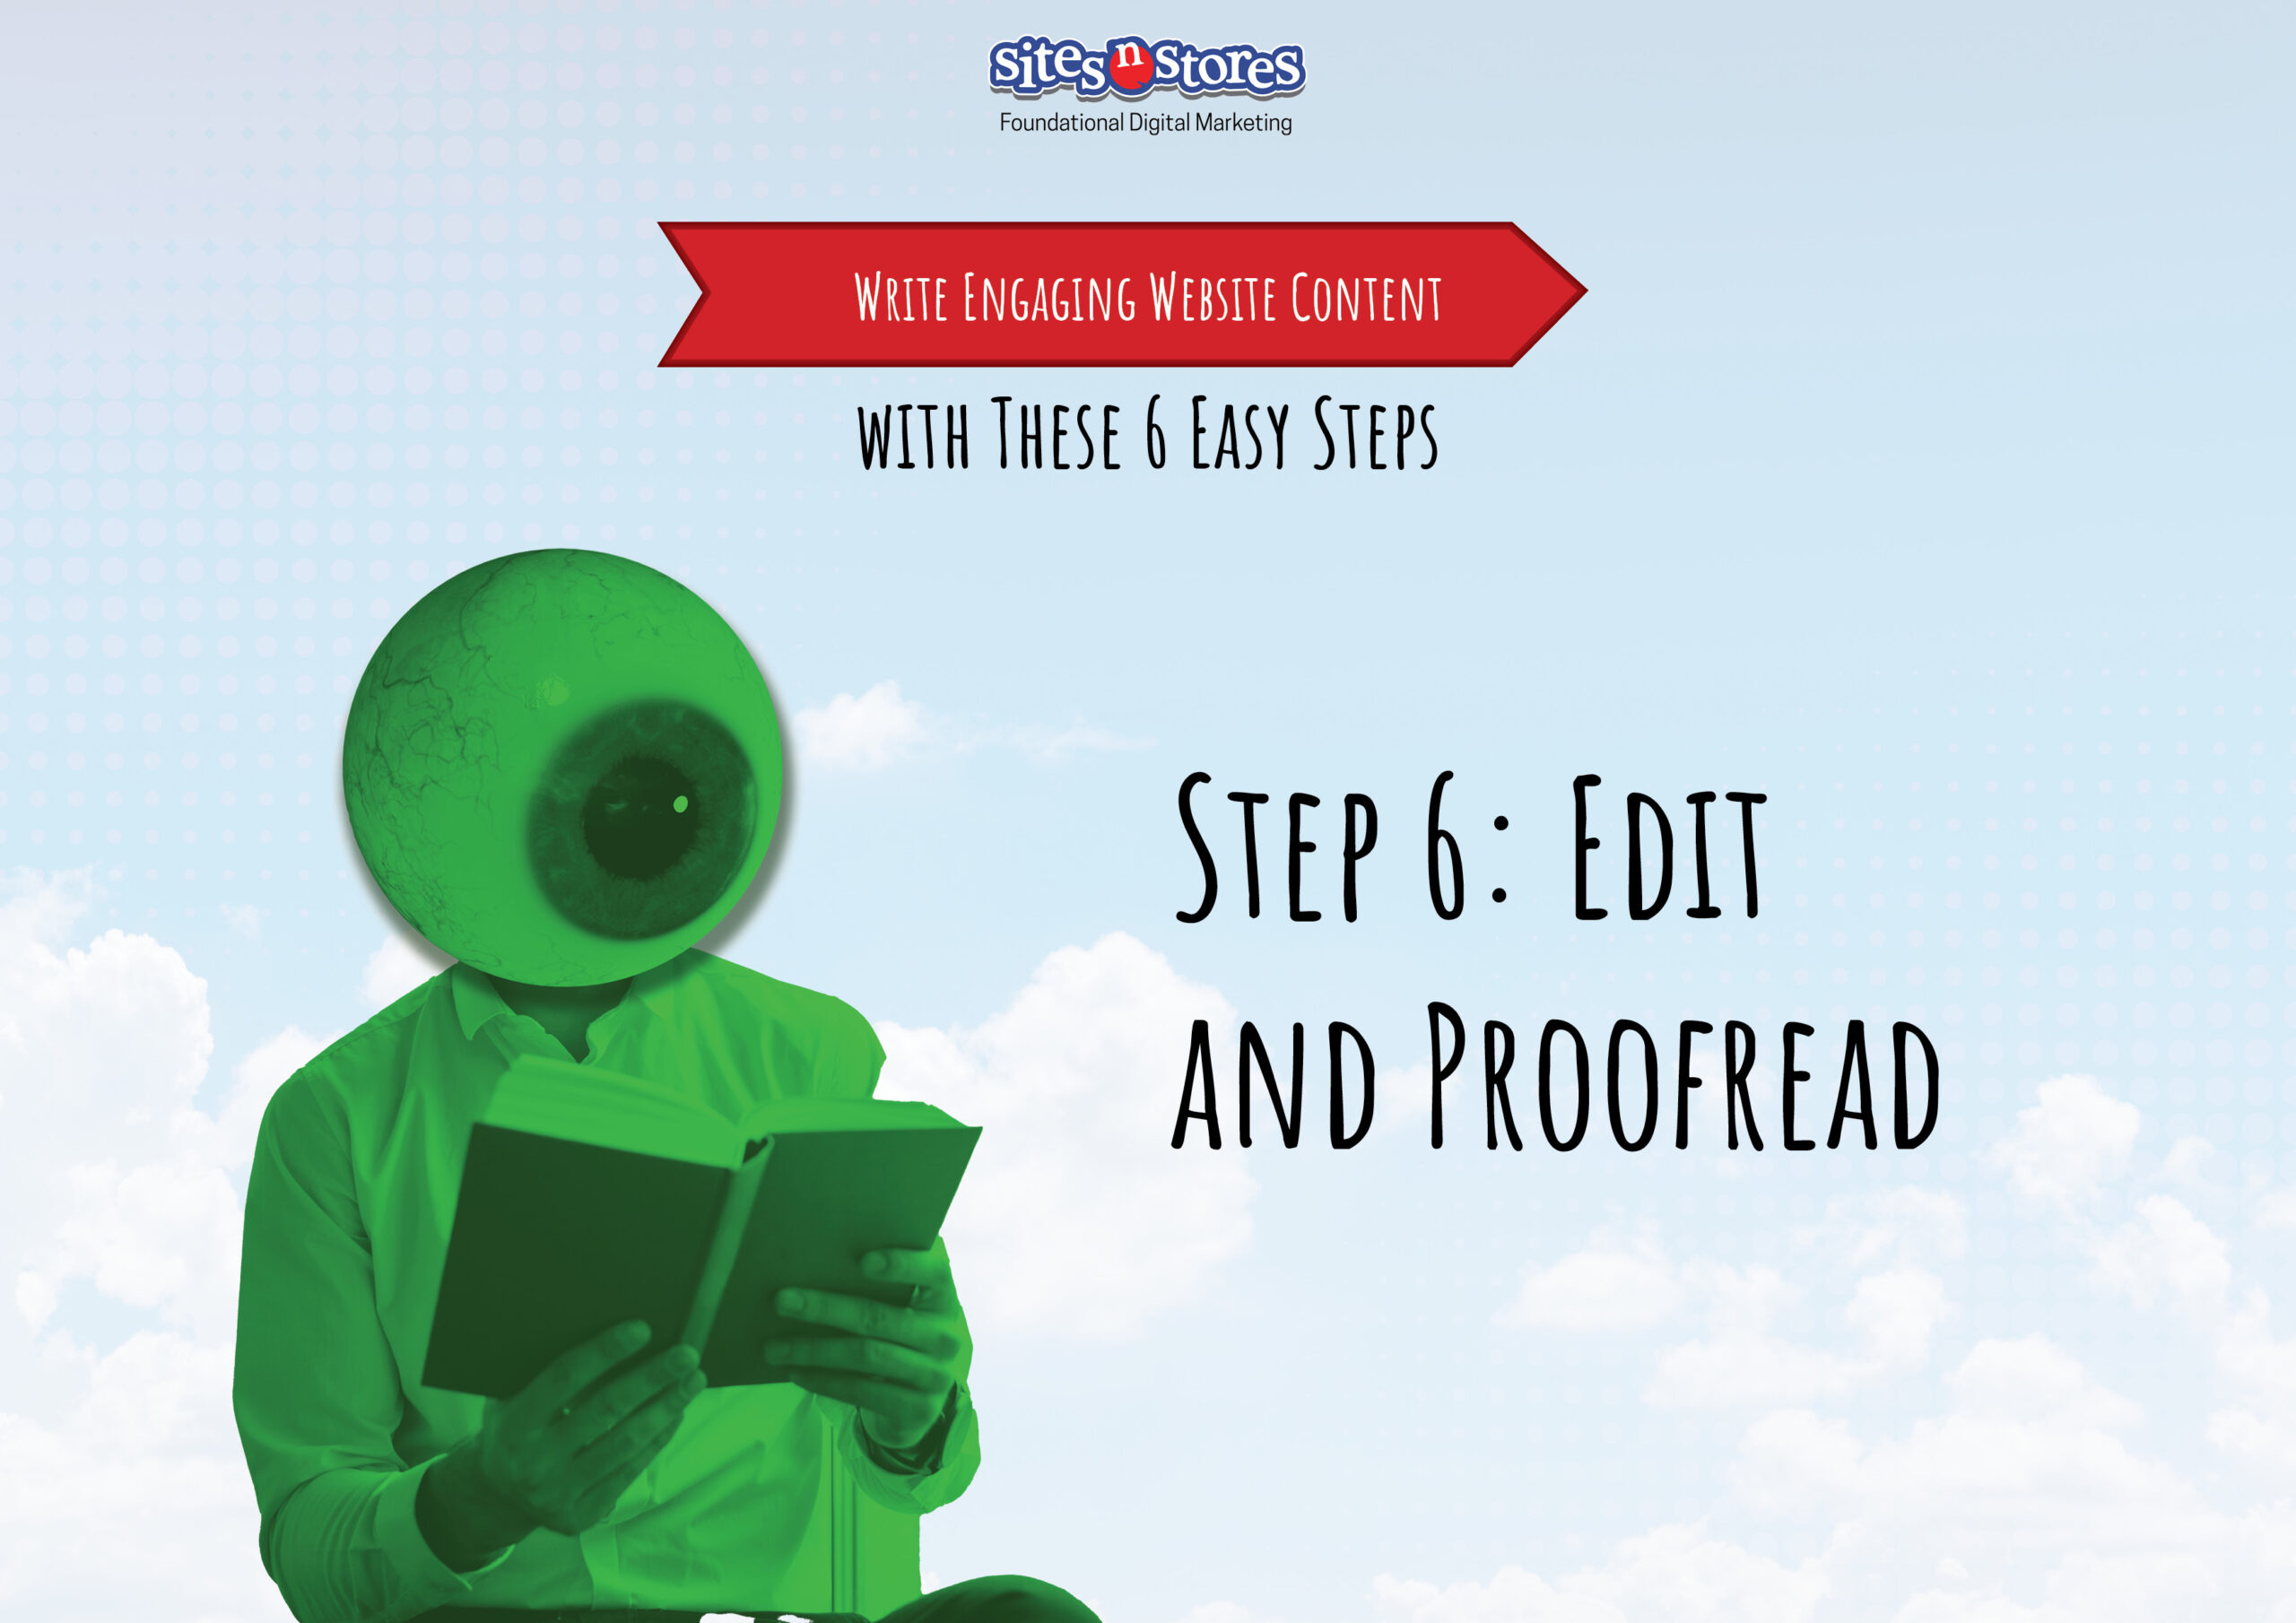 Step 6: Edit and Proofread